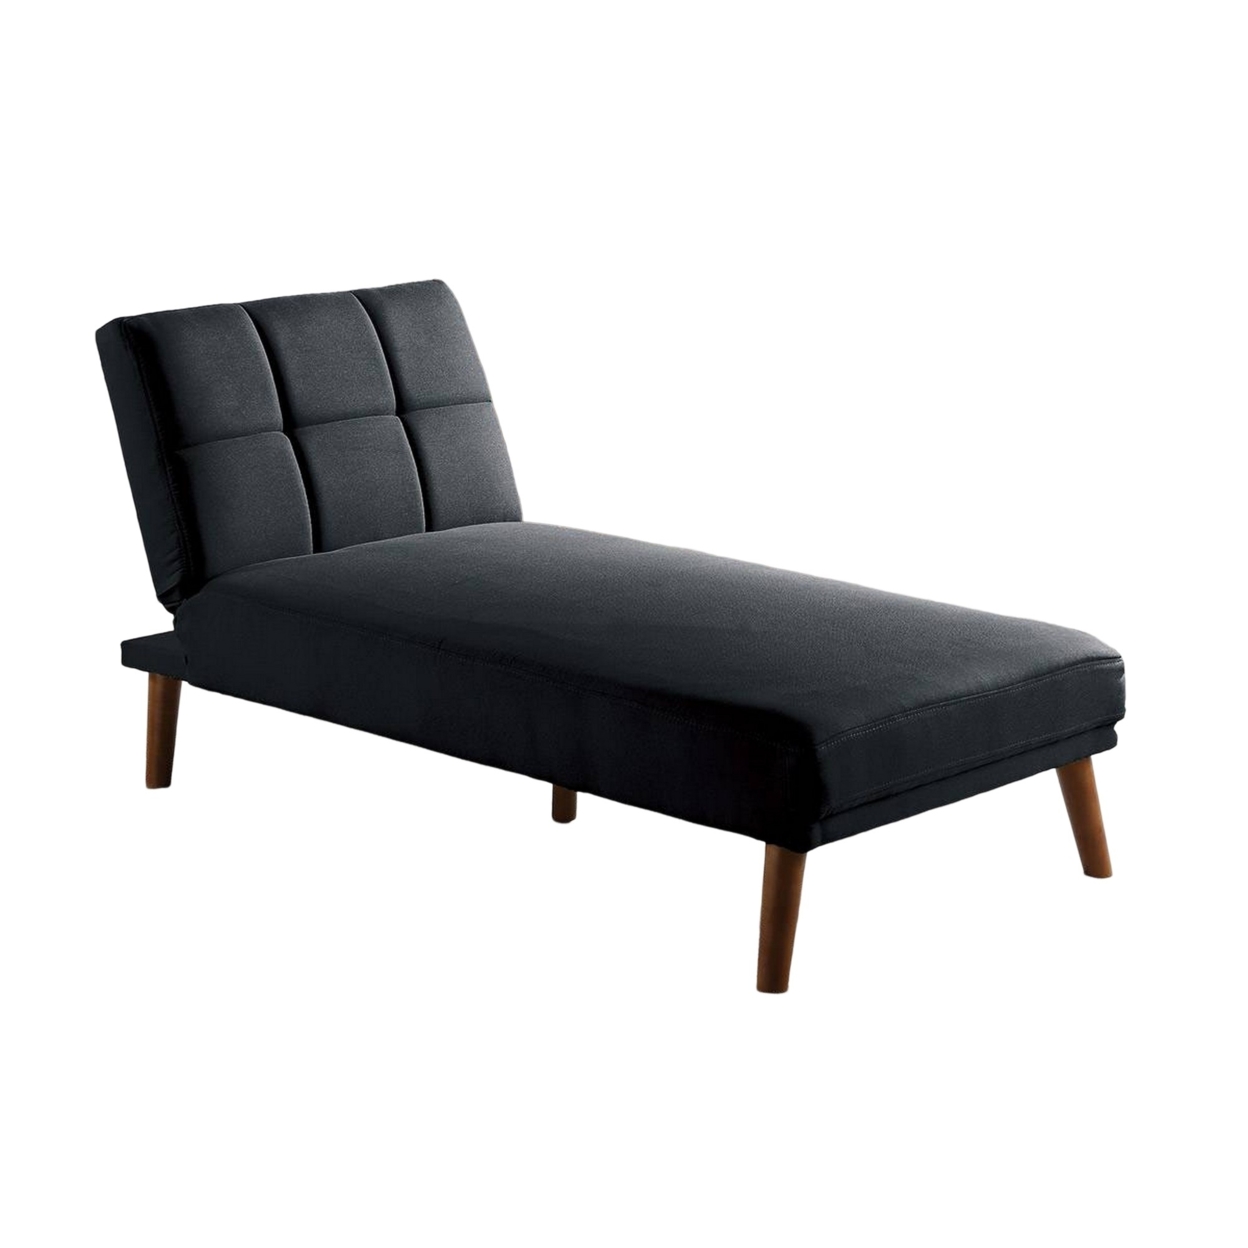 Gina 62 Inch Modern Adjustable Chaise, Square Tufting, Tapered Legs, Black